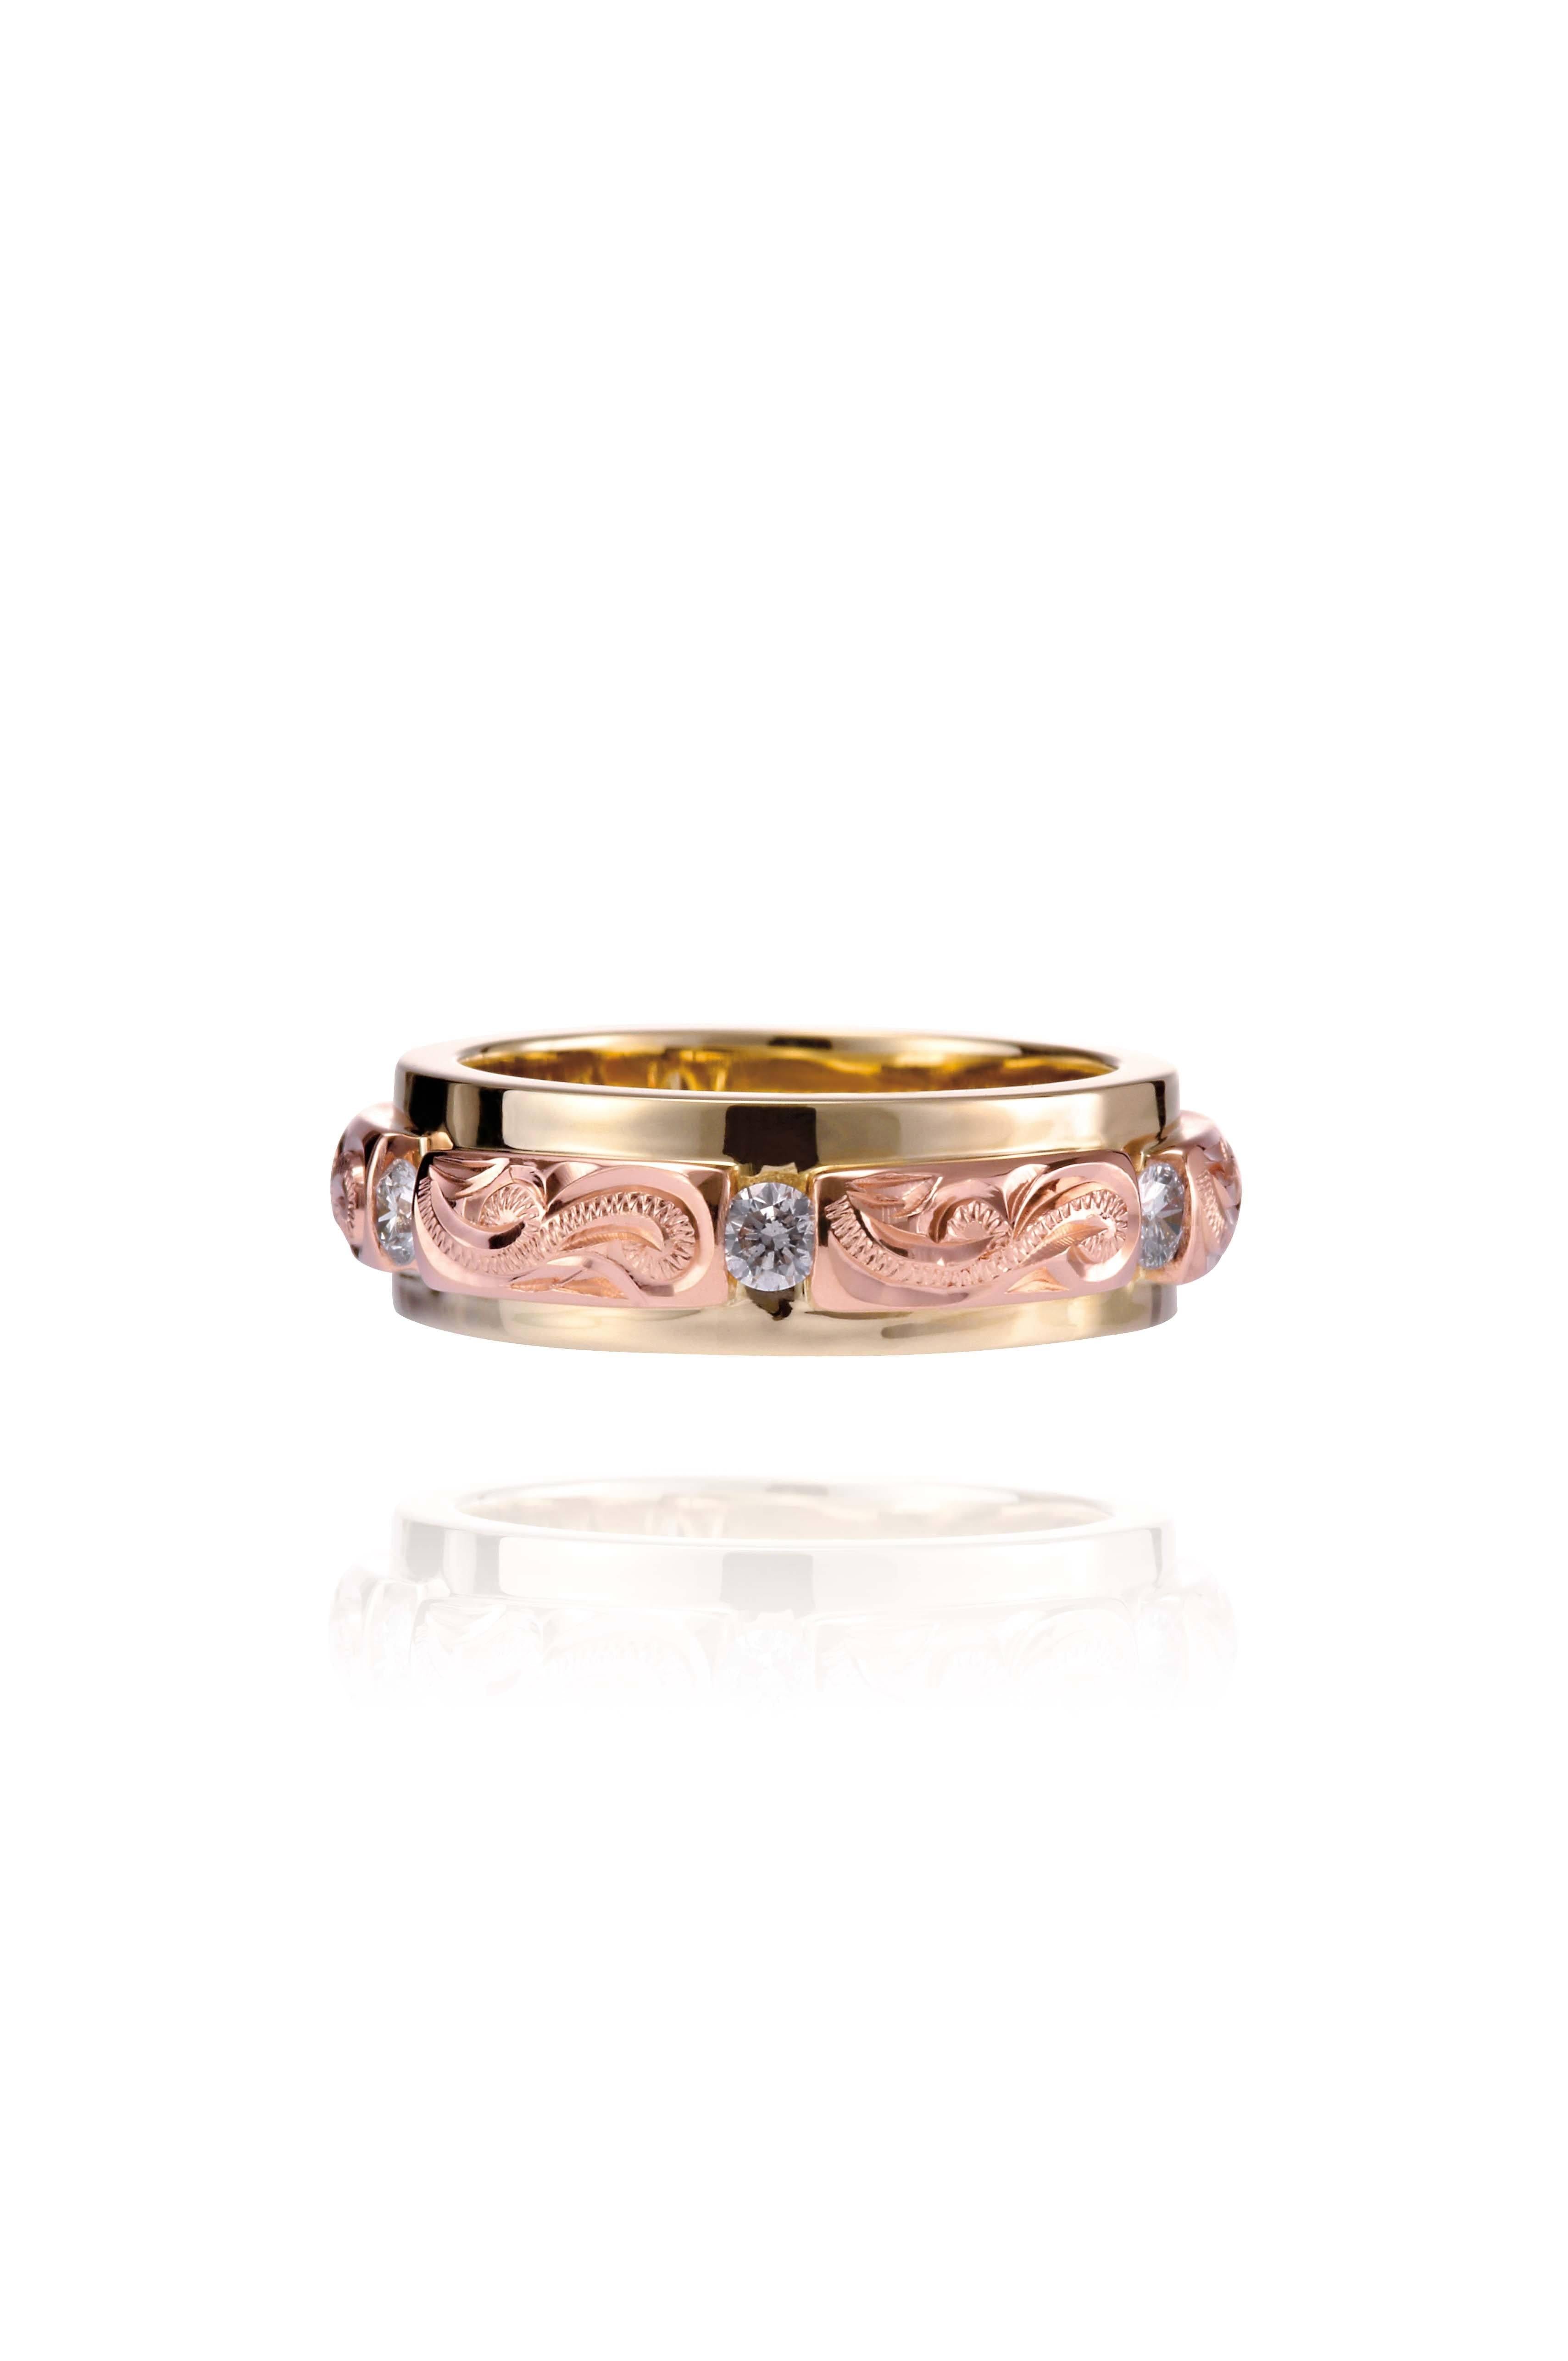 The picture shows a 14K yellow and rose gold two-tone infinity ring with diamonds and hand-engravings.